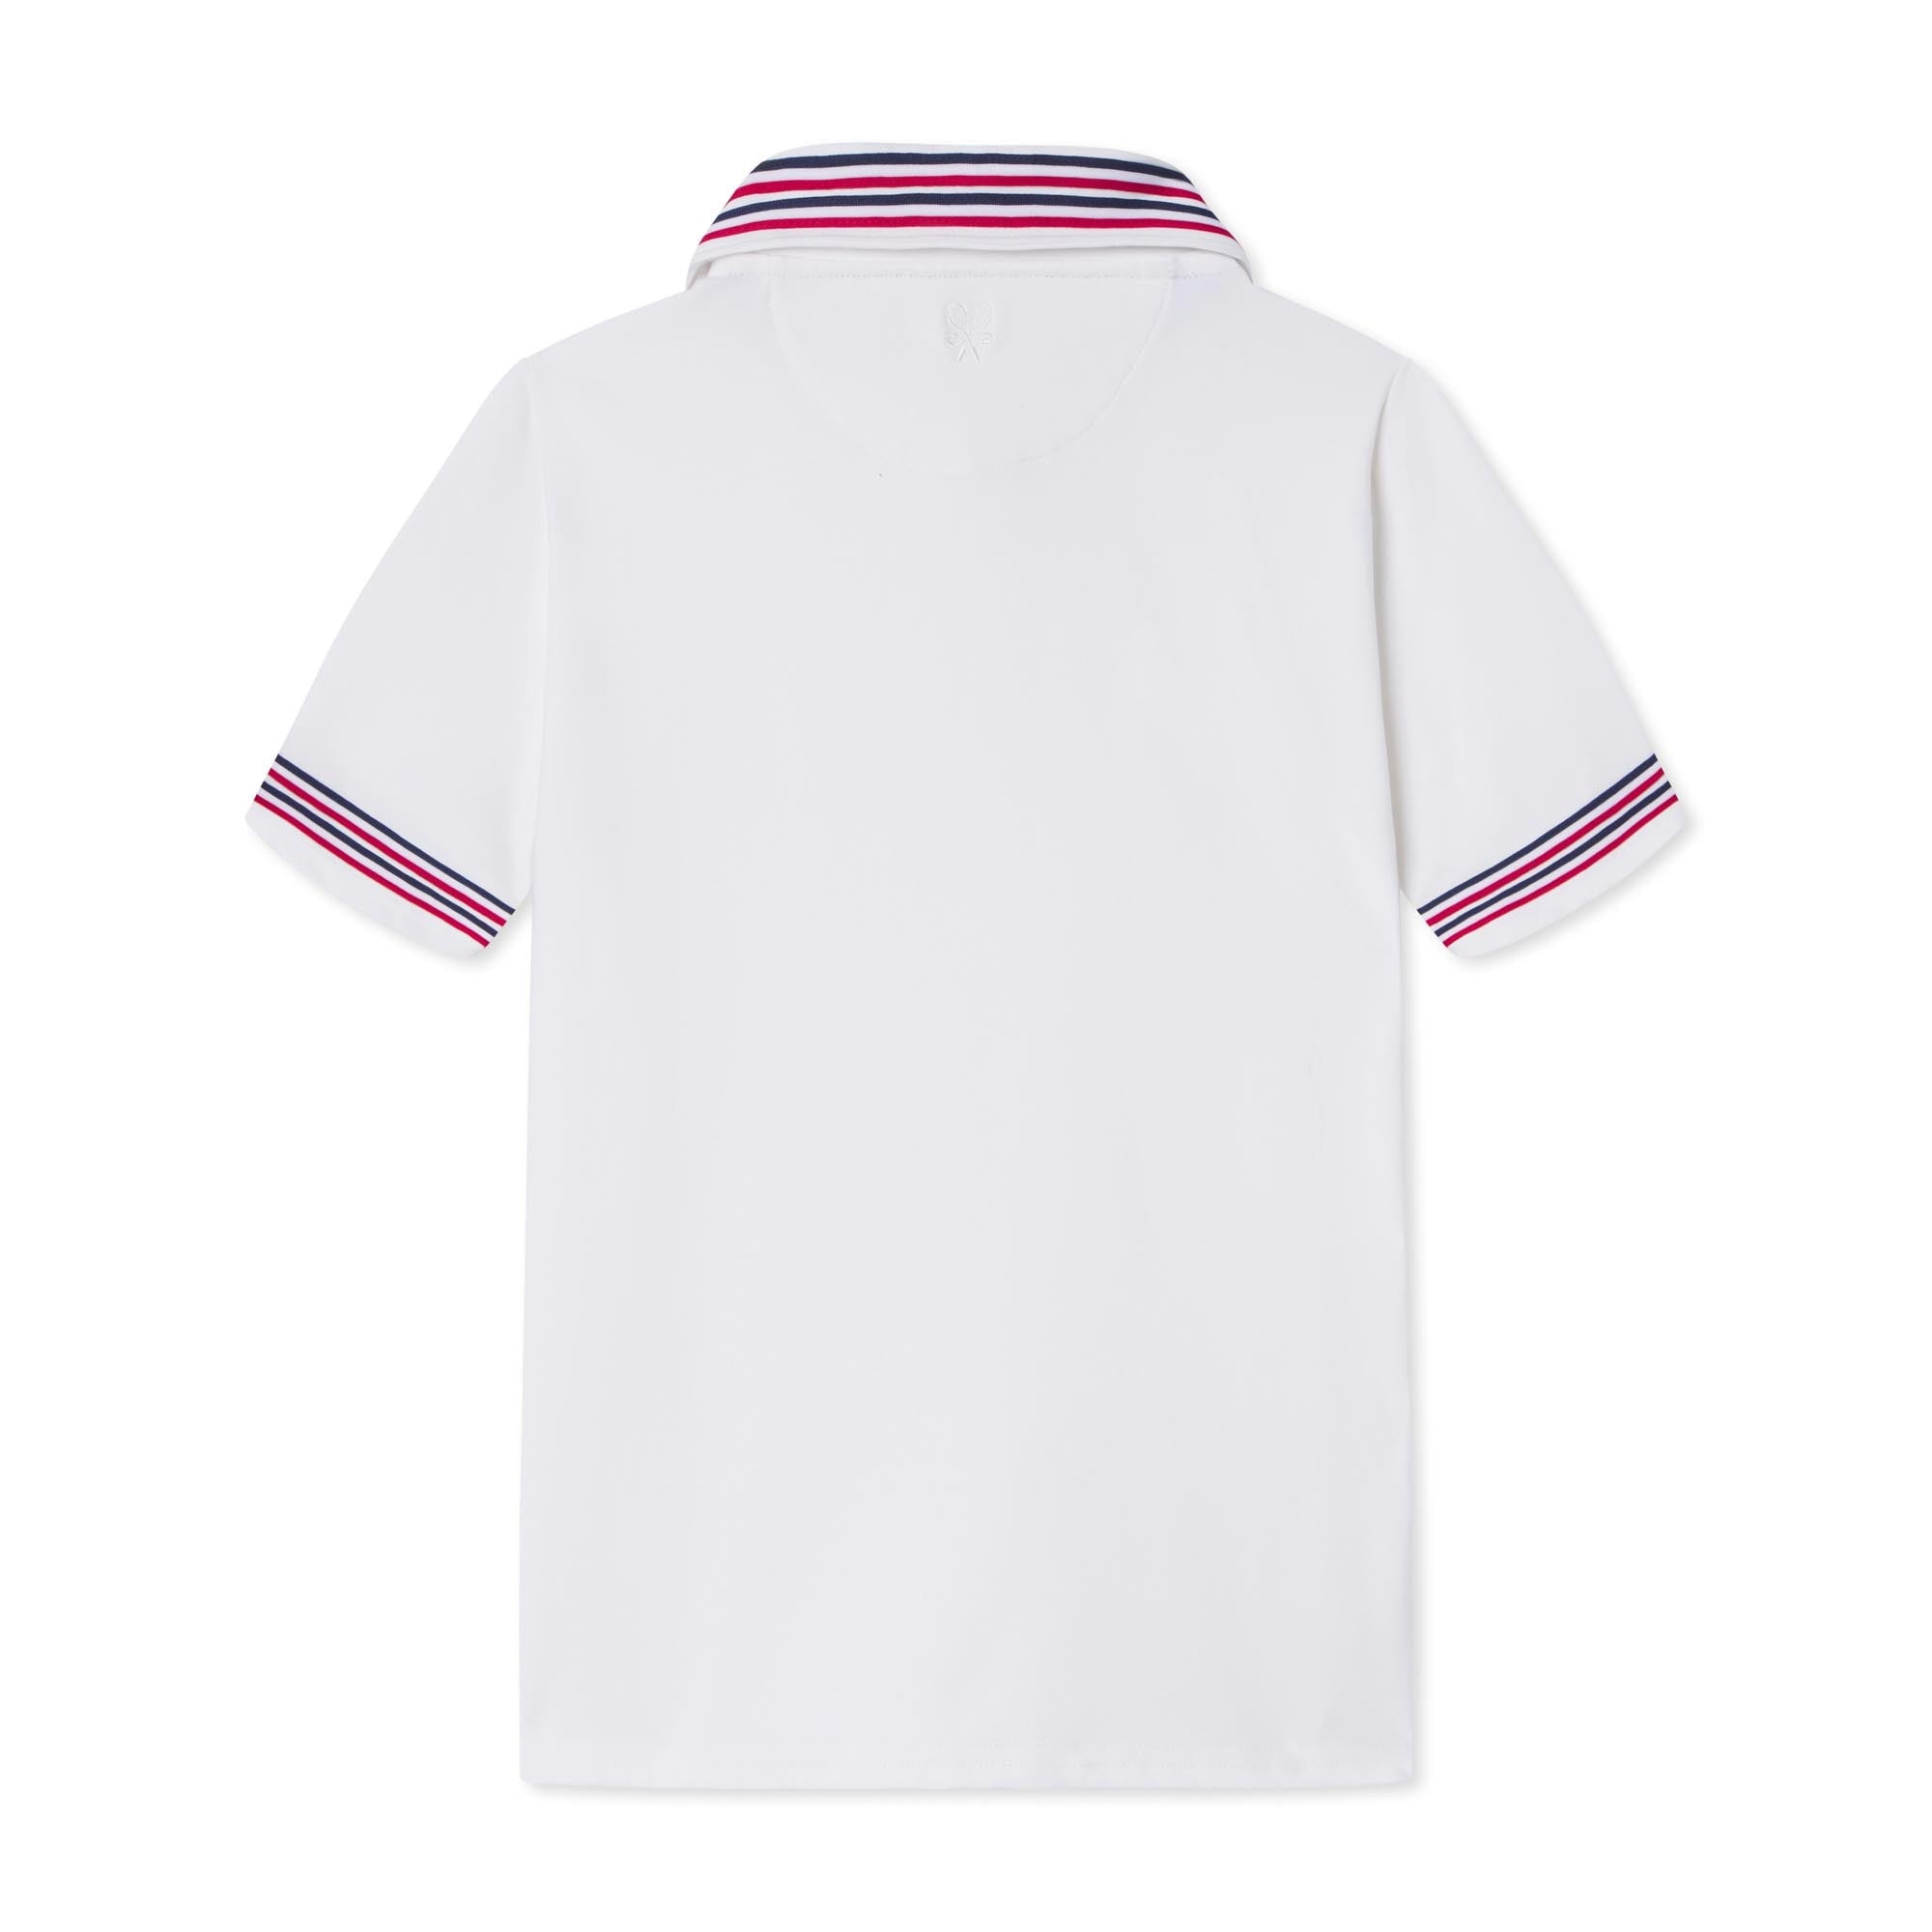 Terence Tennis Performance Americana Polo, Bright White